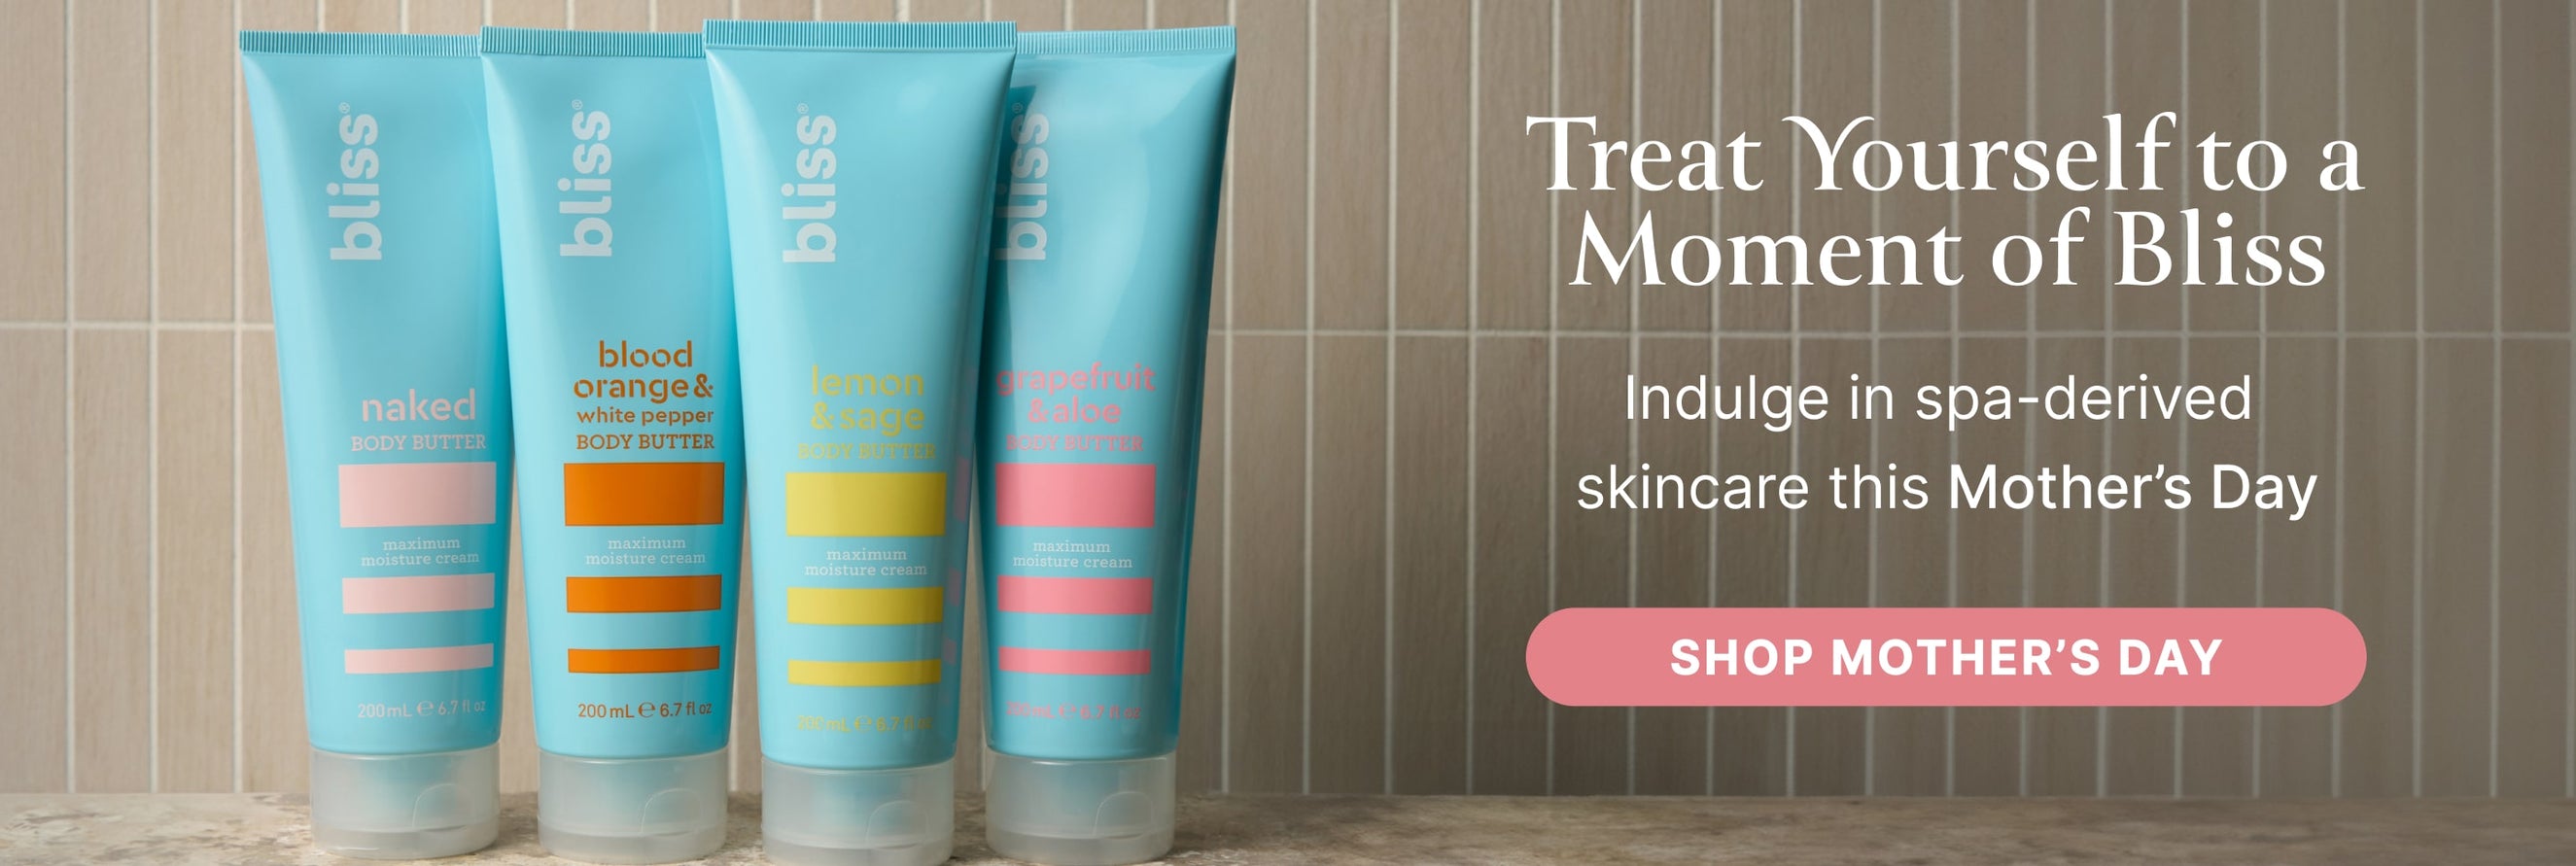 Treat yourself to a moment of Bliss. Indulge in spa-derived skincare this Mother's Day. Shop Mother's Day